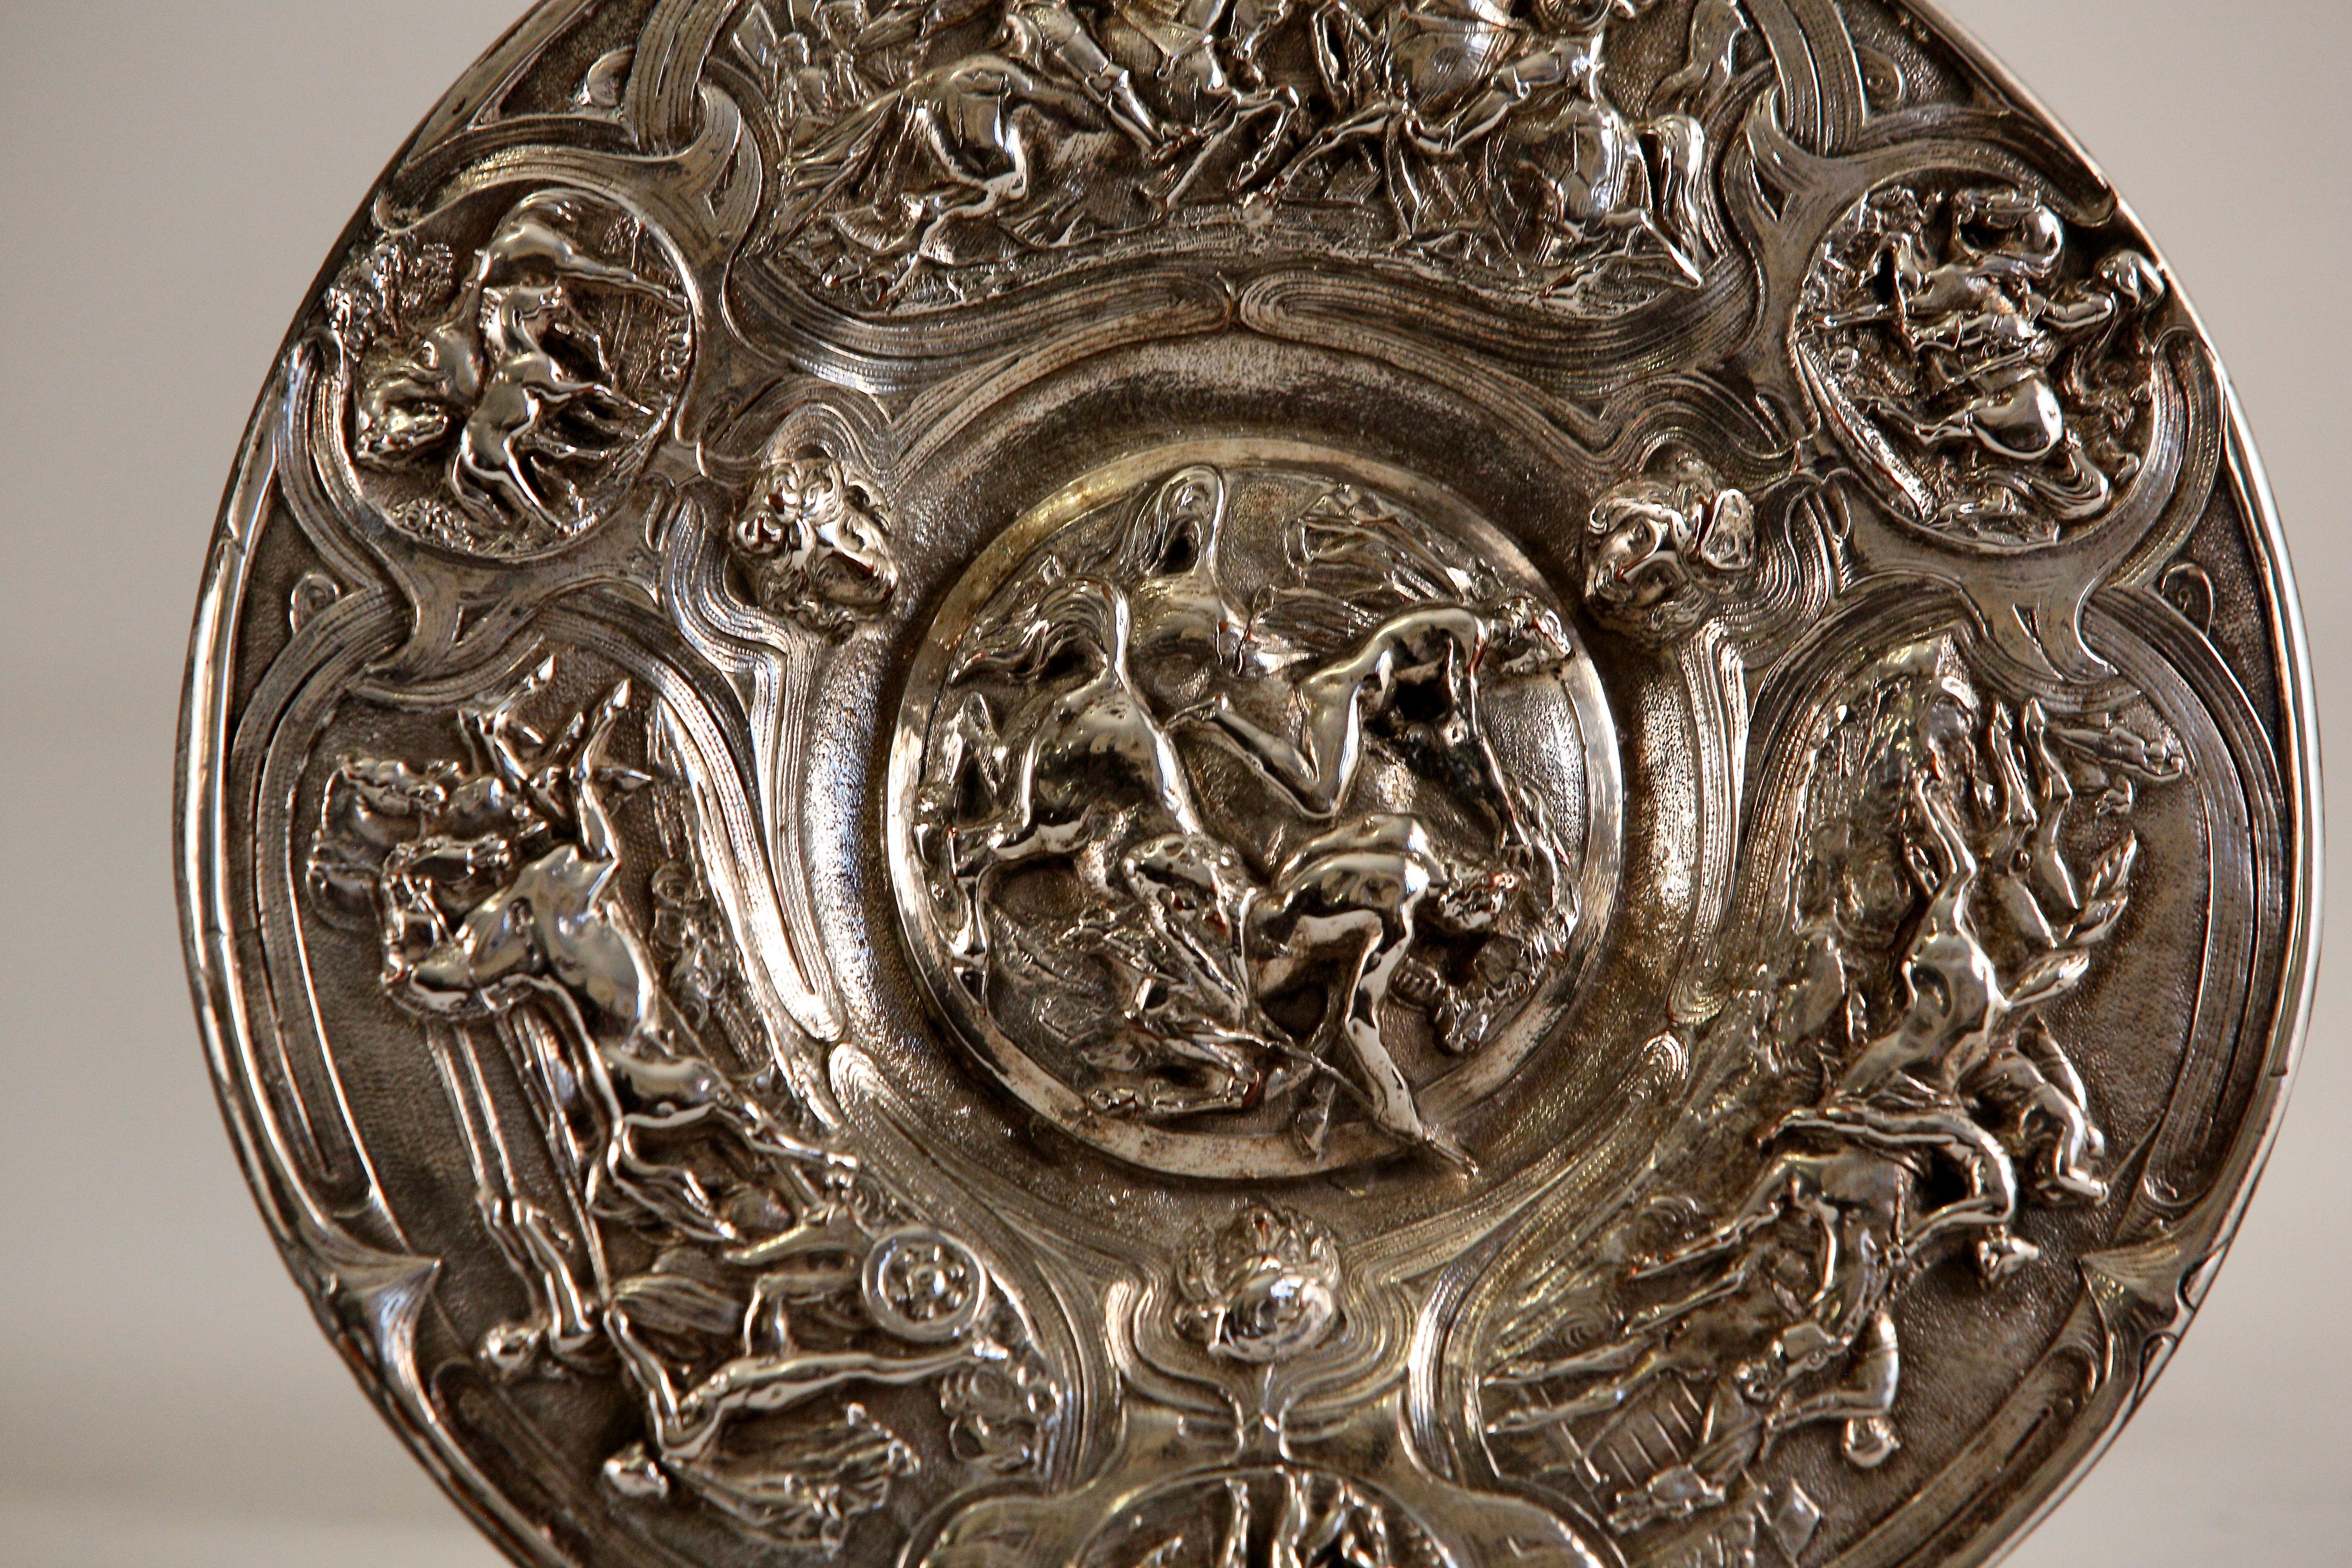 20th Century Silver Plated Trophy Dish Tazza with Gladiatorial and Horse Racing Scenes